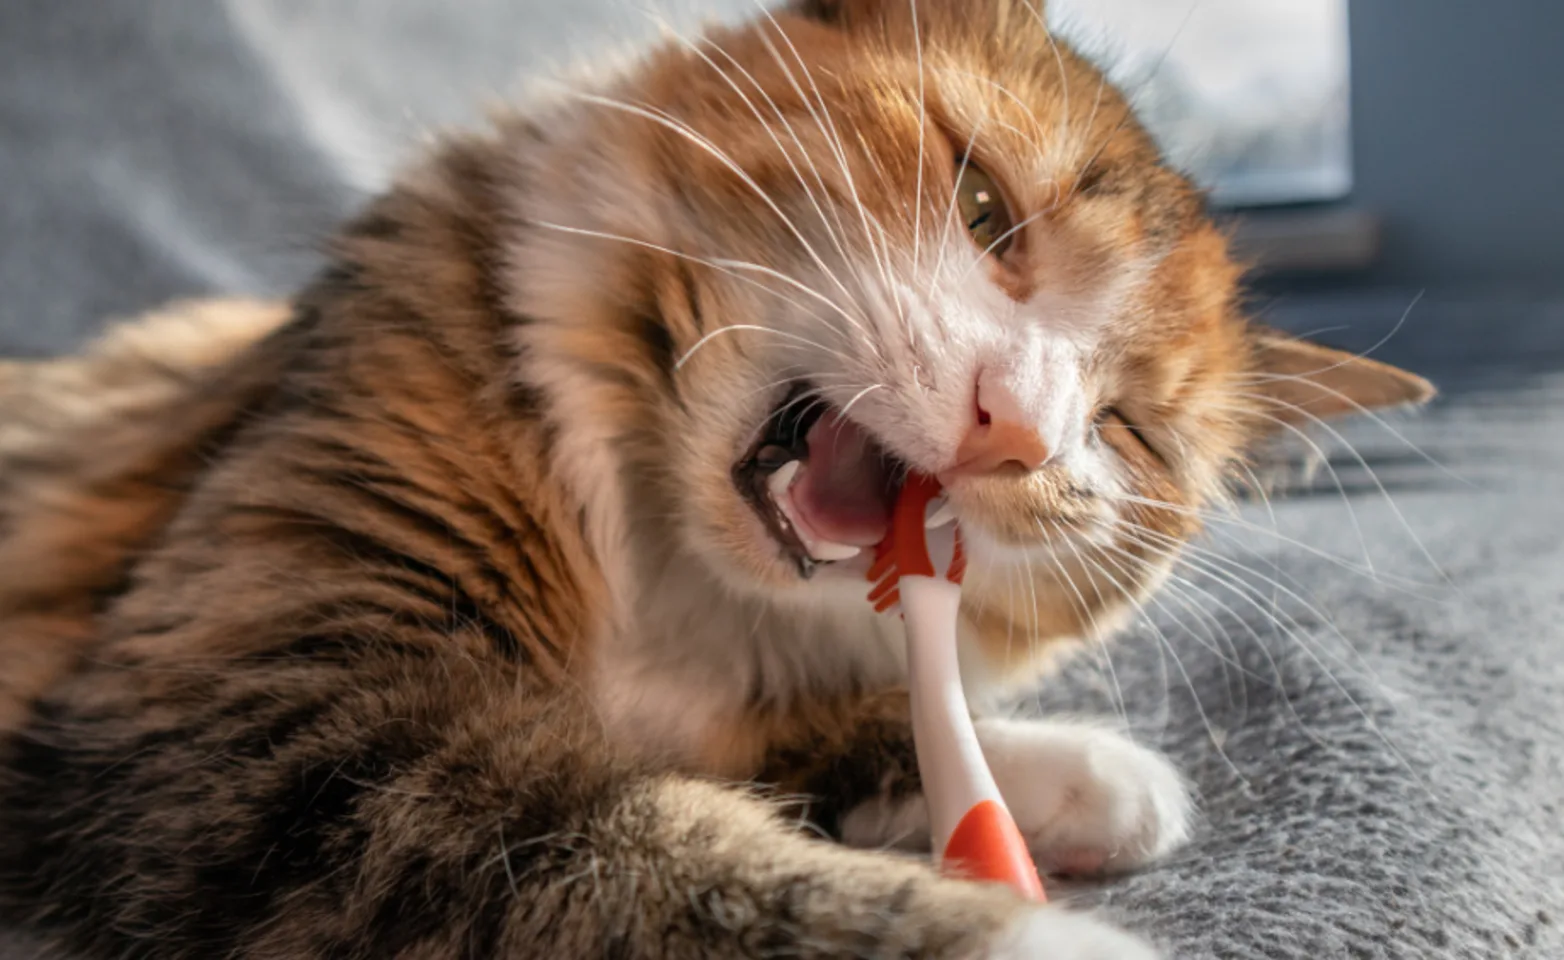 Brown Cat Biting on a Red Toothbrush